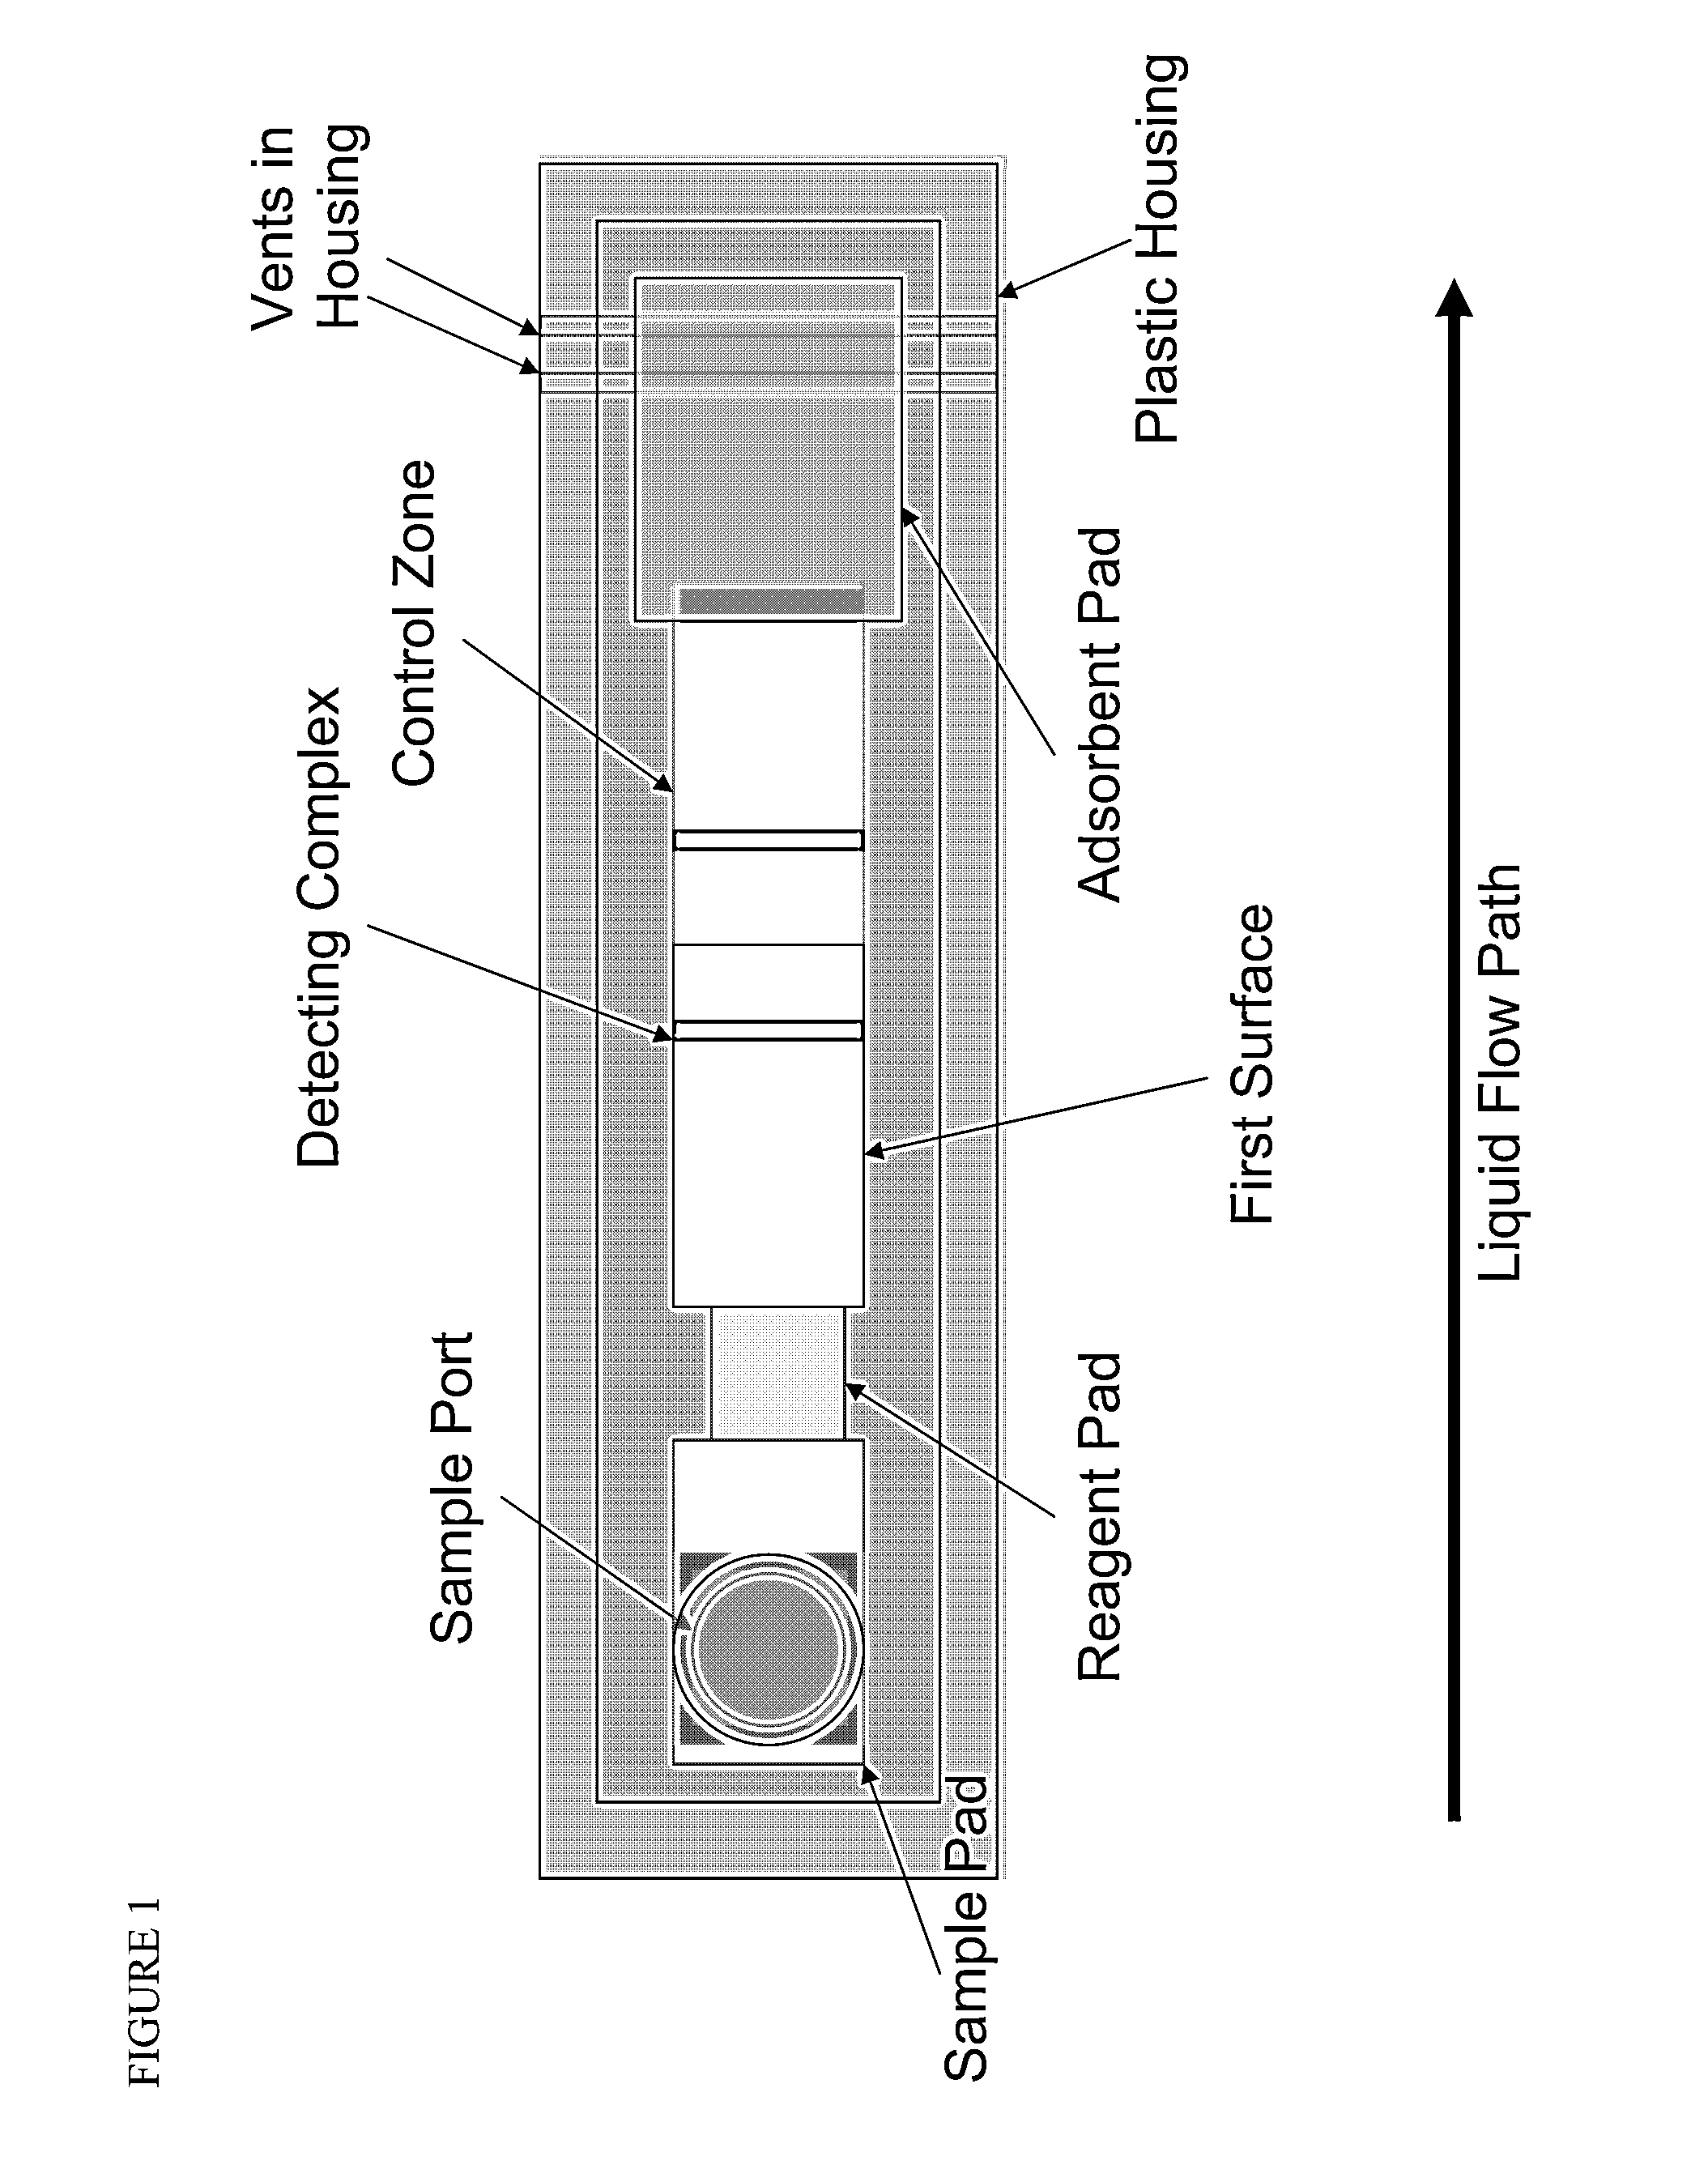 Lateral flow strip assay with immobilized conjugate